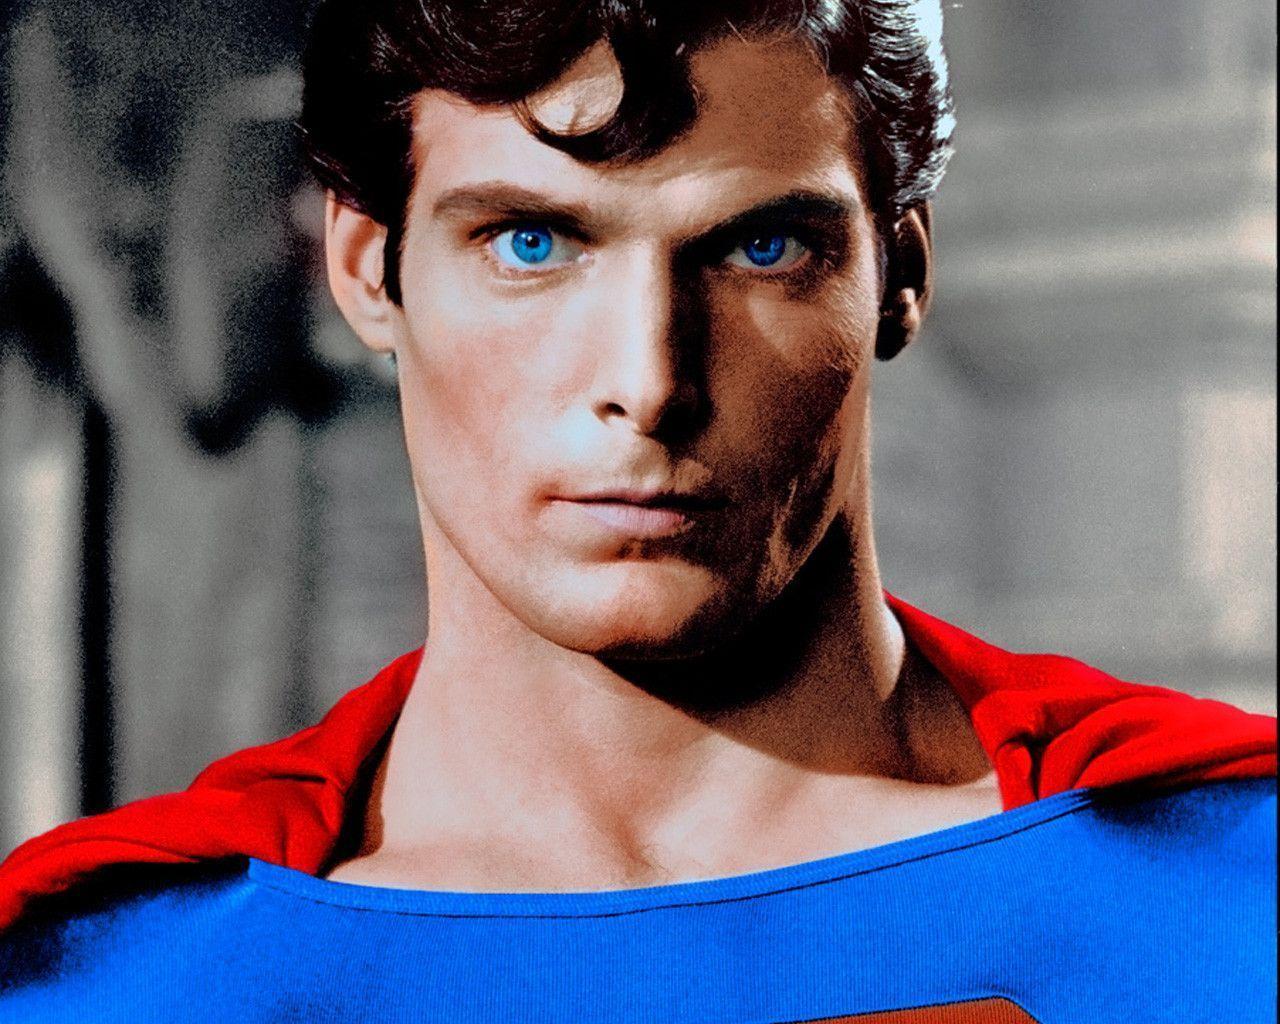 Christopher Reeve&;s SUPERMAN vs The Avengers HULK and THOR